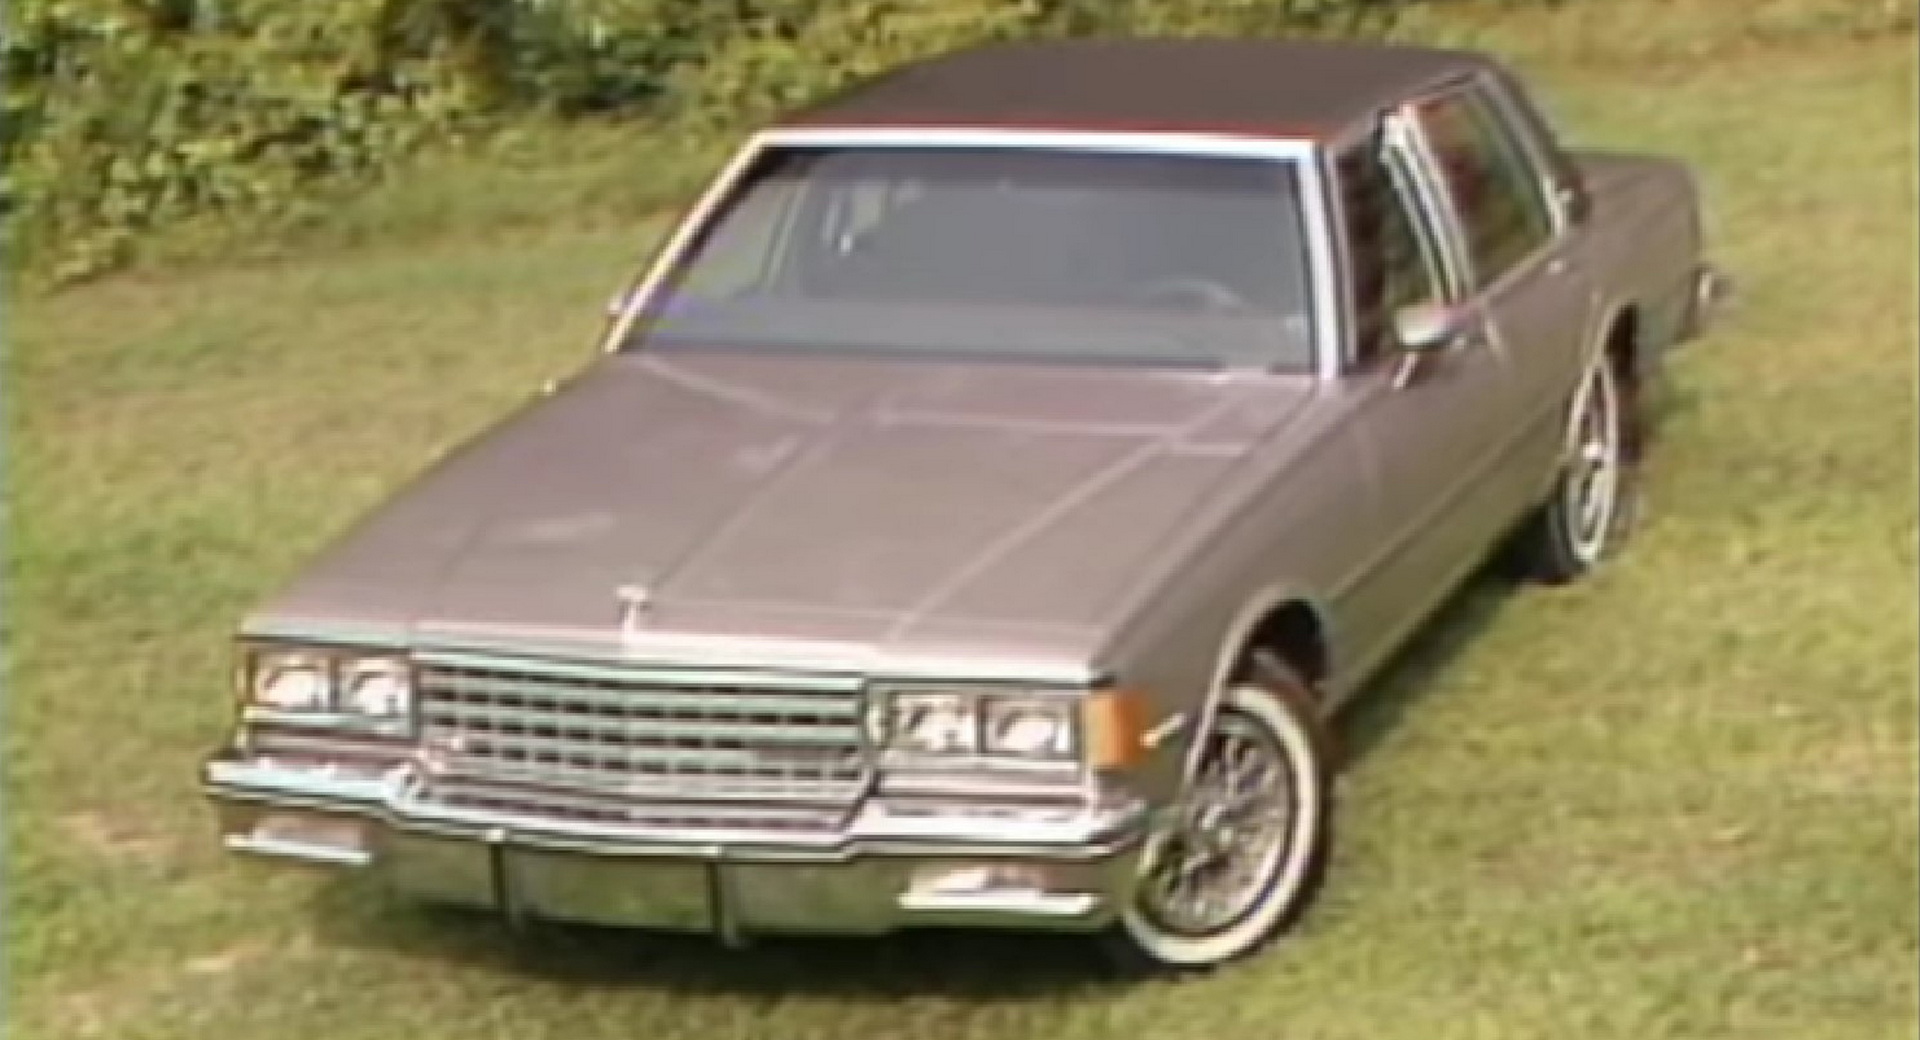 Big, Simple, And Cheap, There Were Reasons To Love The 1984 Chevrolet Caprice Classic Auto Recent